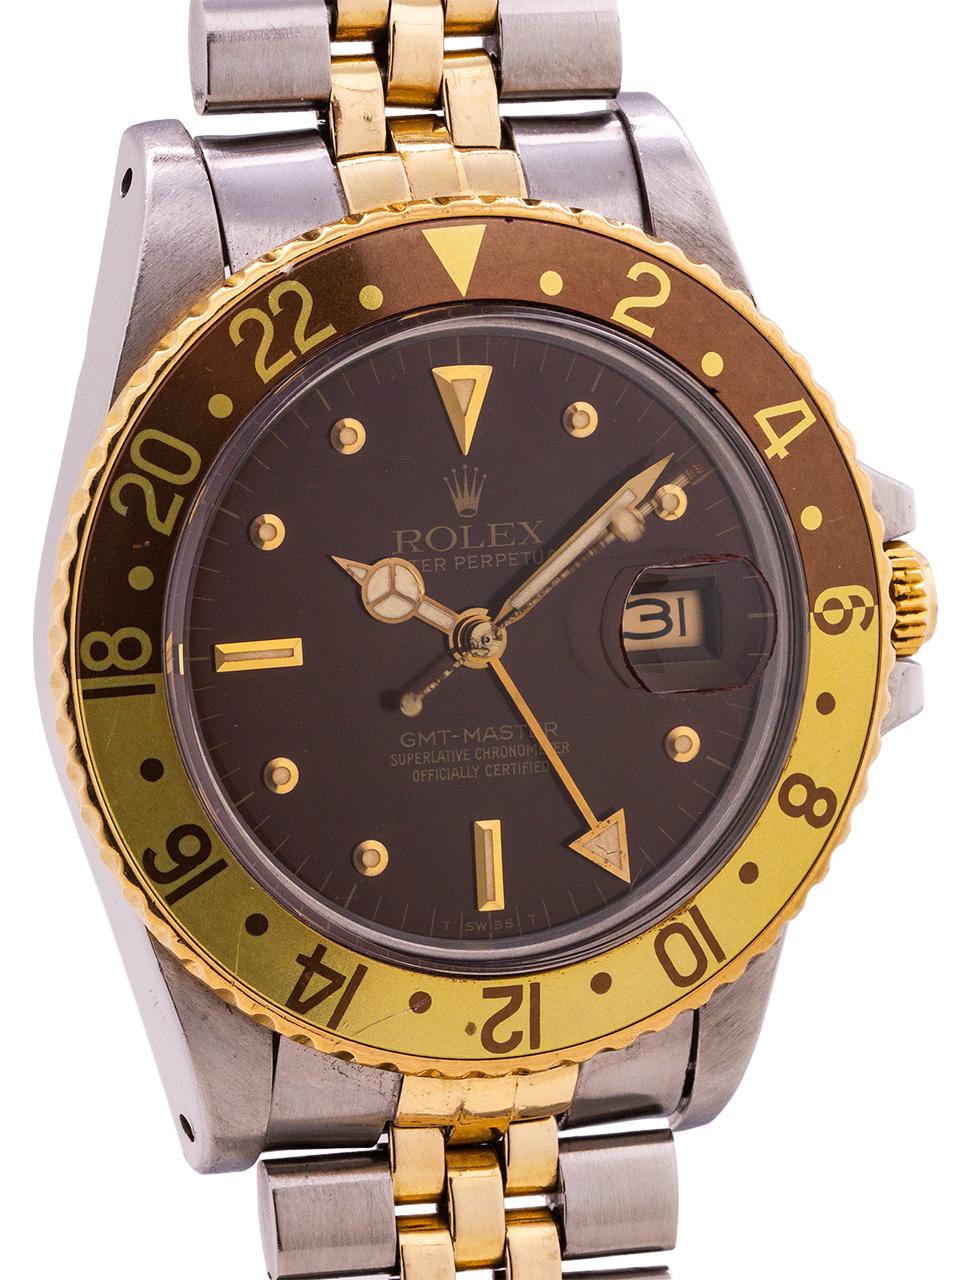 
Exceptional condition example Rolex GMT ref 16753 SS/18K YG case serial # 8.0 million circa 1981. Featuring 40mm diameter case with bi-directional 24 hour bronze and gold bezel, acrylic crystal, and original “root beer” dial with popular vintage